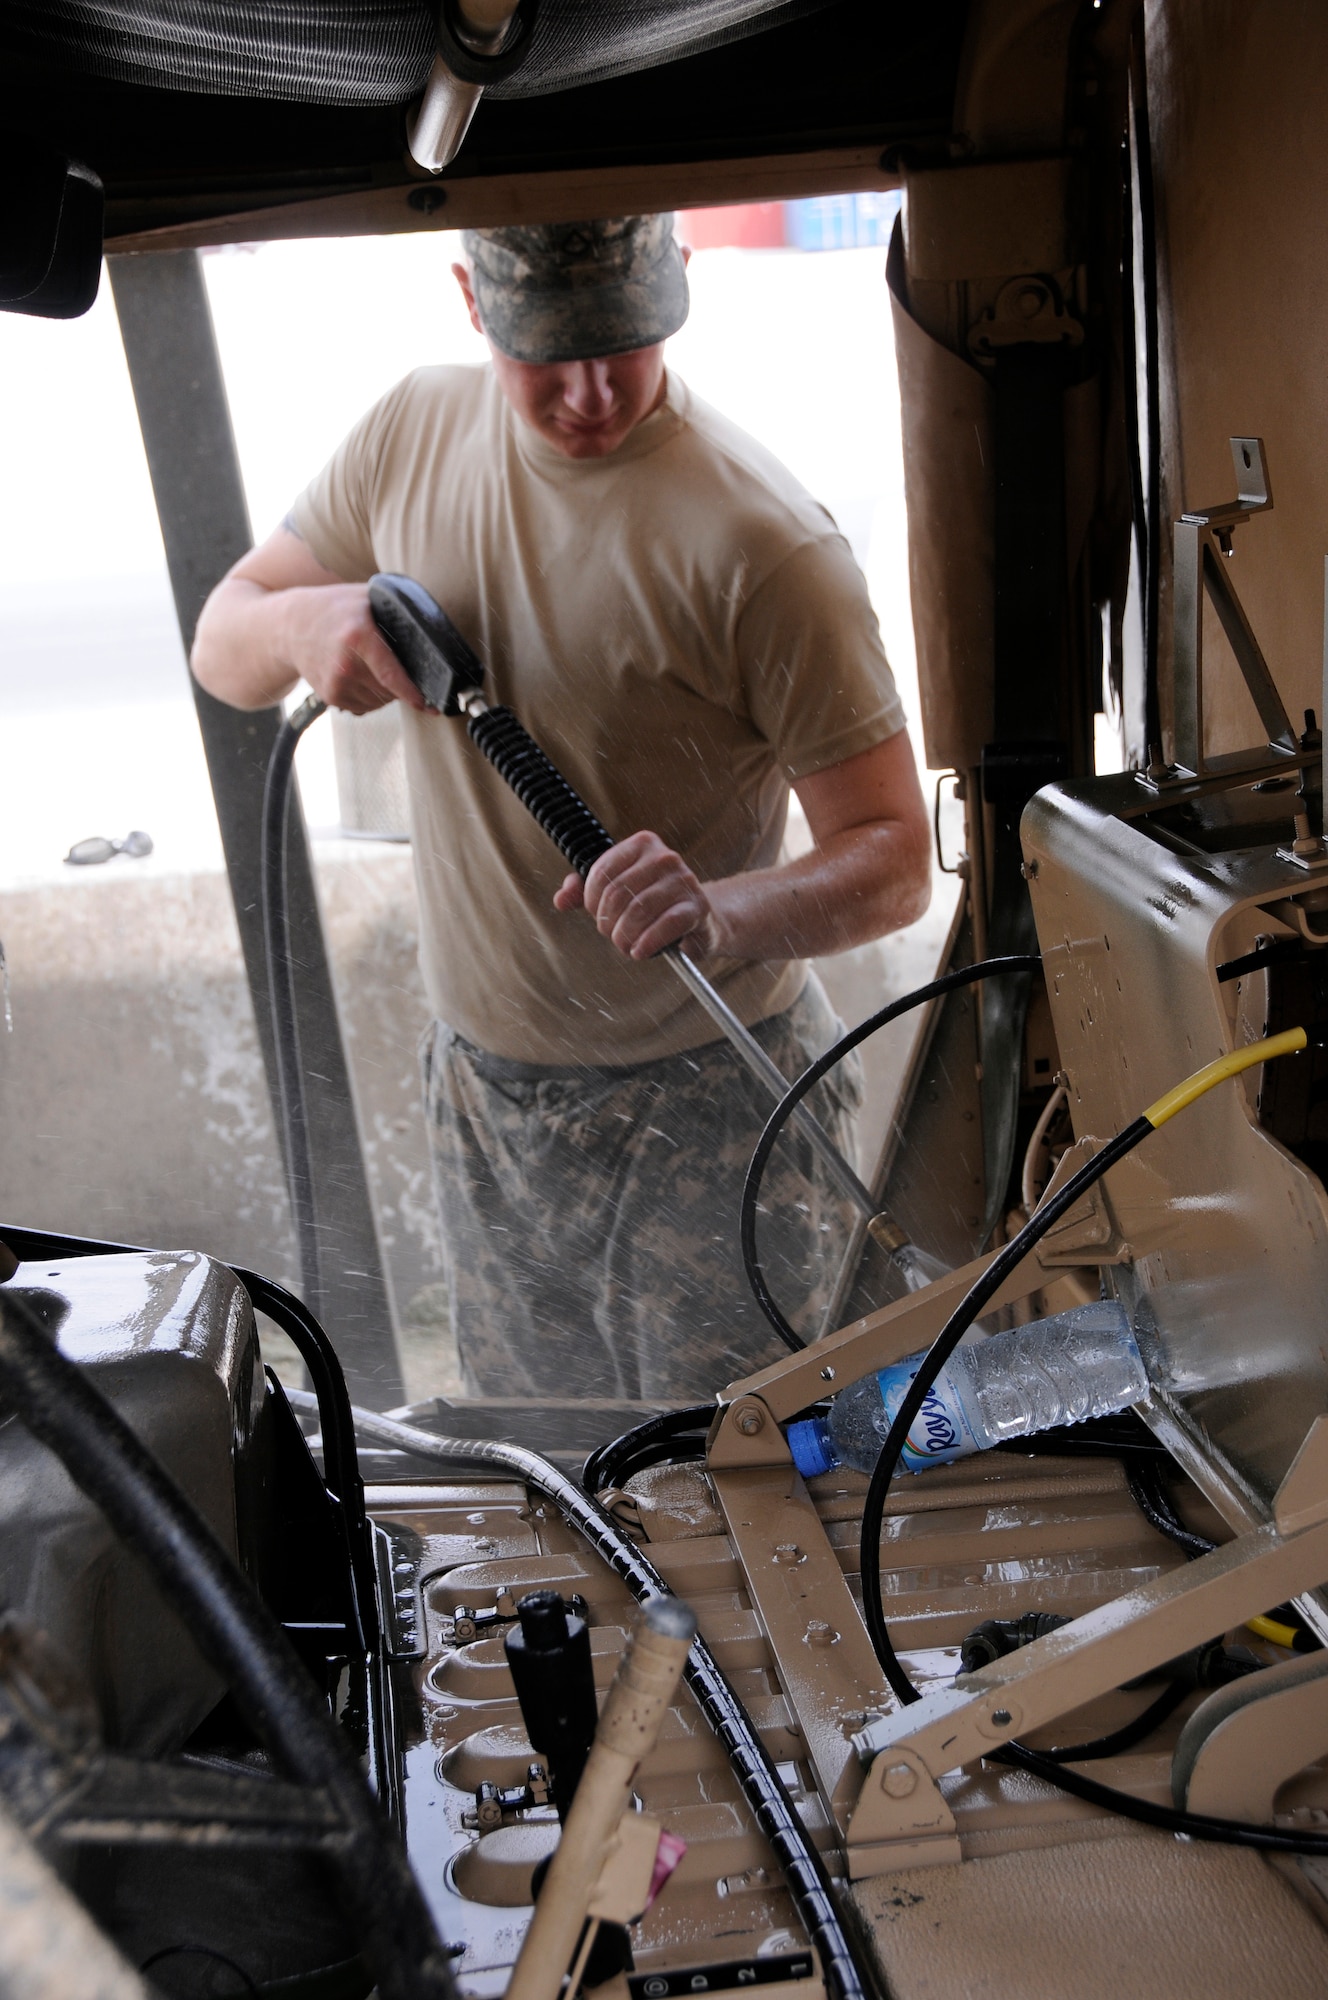 Private 1st Class Kevin Page, A 2-43, Air Defense Artillery from Fort Bliss, Texas, hoses out the passenger compartment of a Battery Command Post (BCP) vehicle Aug. 7, 2008.  The soldiers are cleaning the BCP in preparation for shipping it back to Texas from an undisclosed airbase in Southwest Asia.  (U.S. Air Force photo by Tech. Sgt. Michael Boquette/RELEASED)